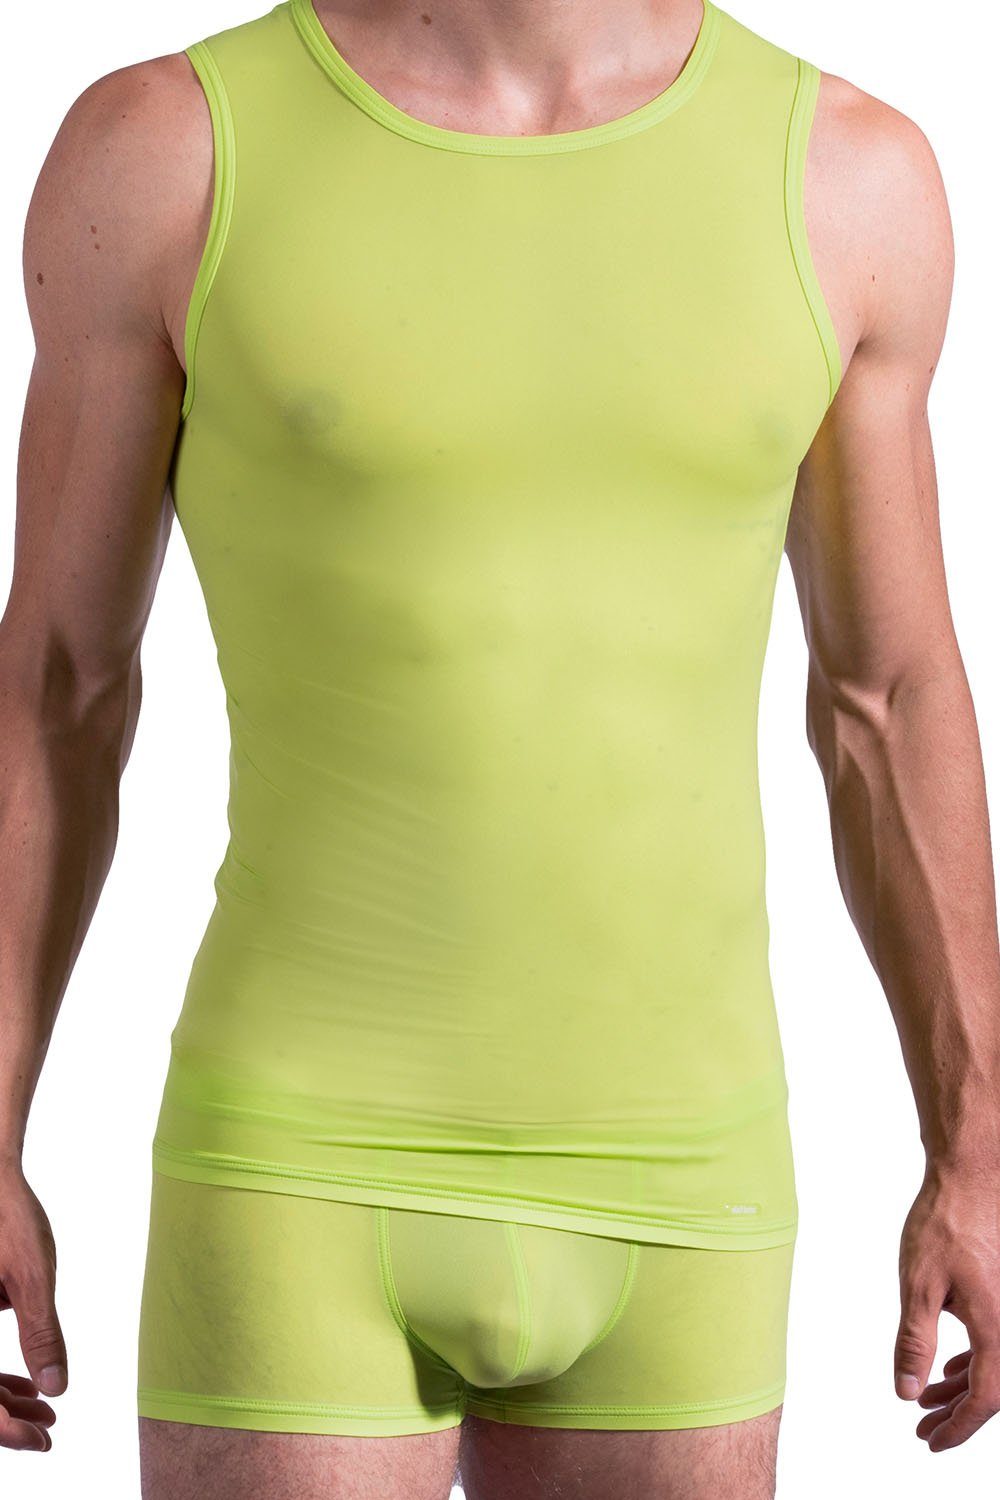 Olaf Benz Muskelshirt Tanktop lime 106025 green